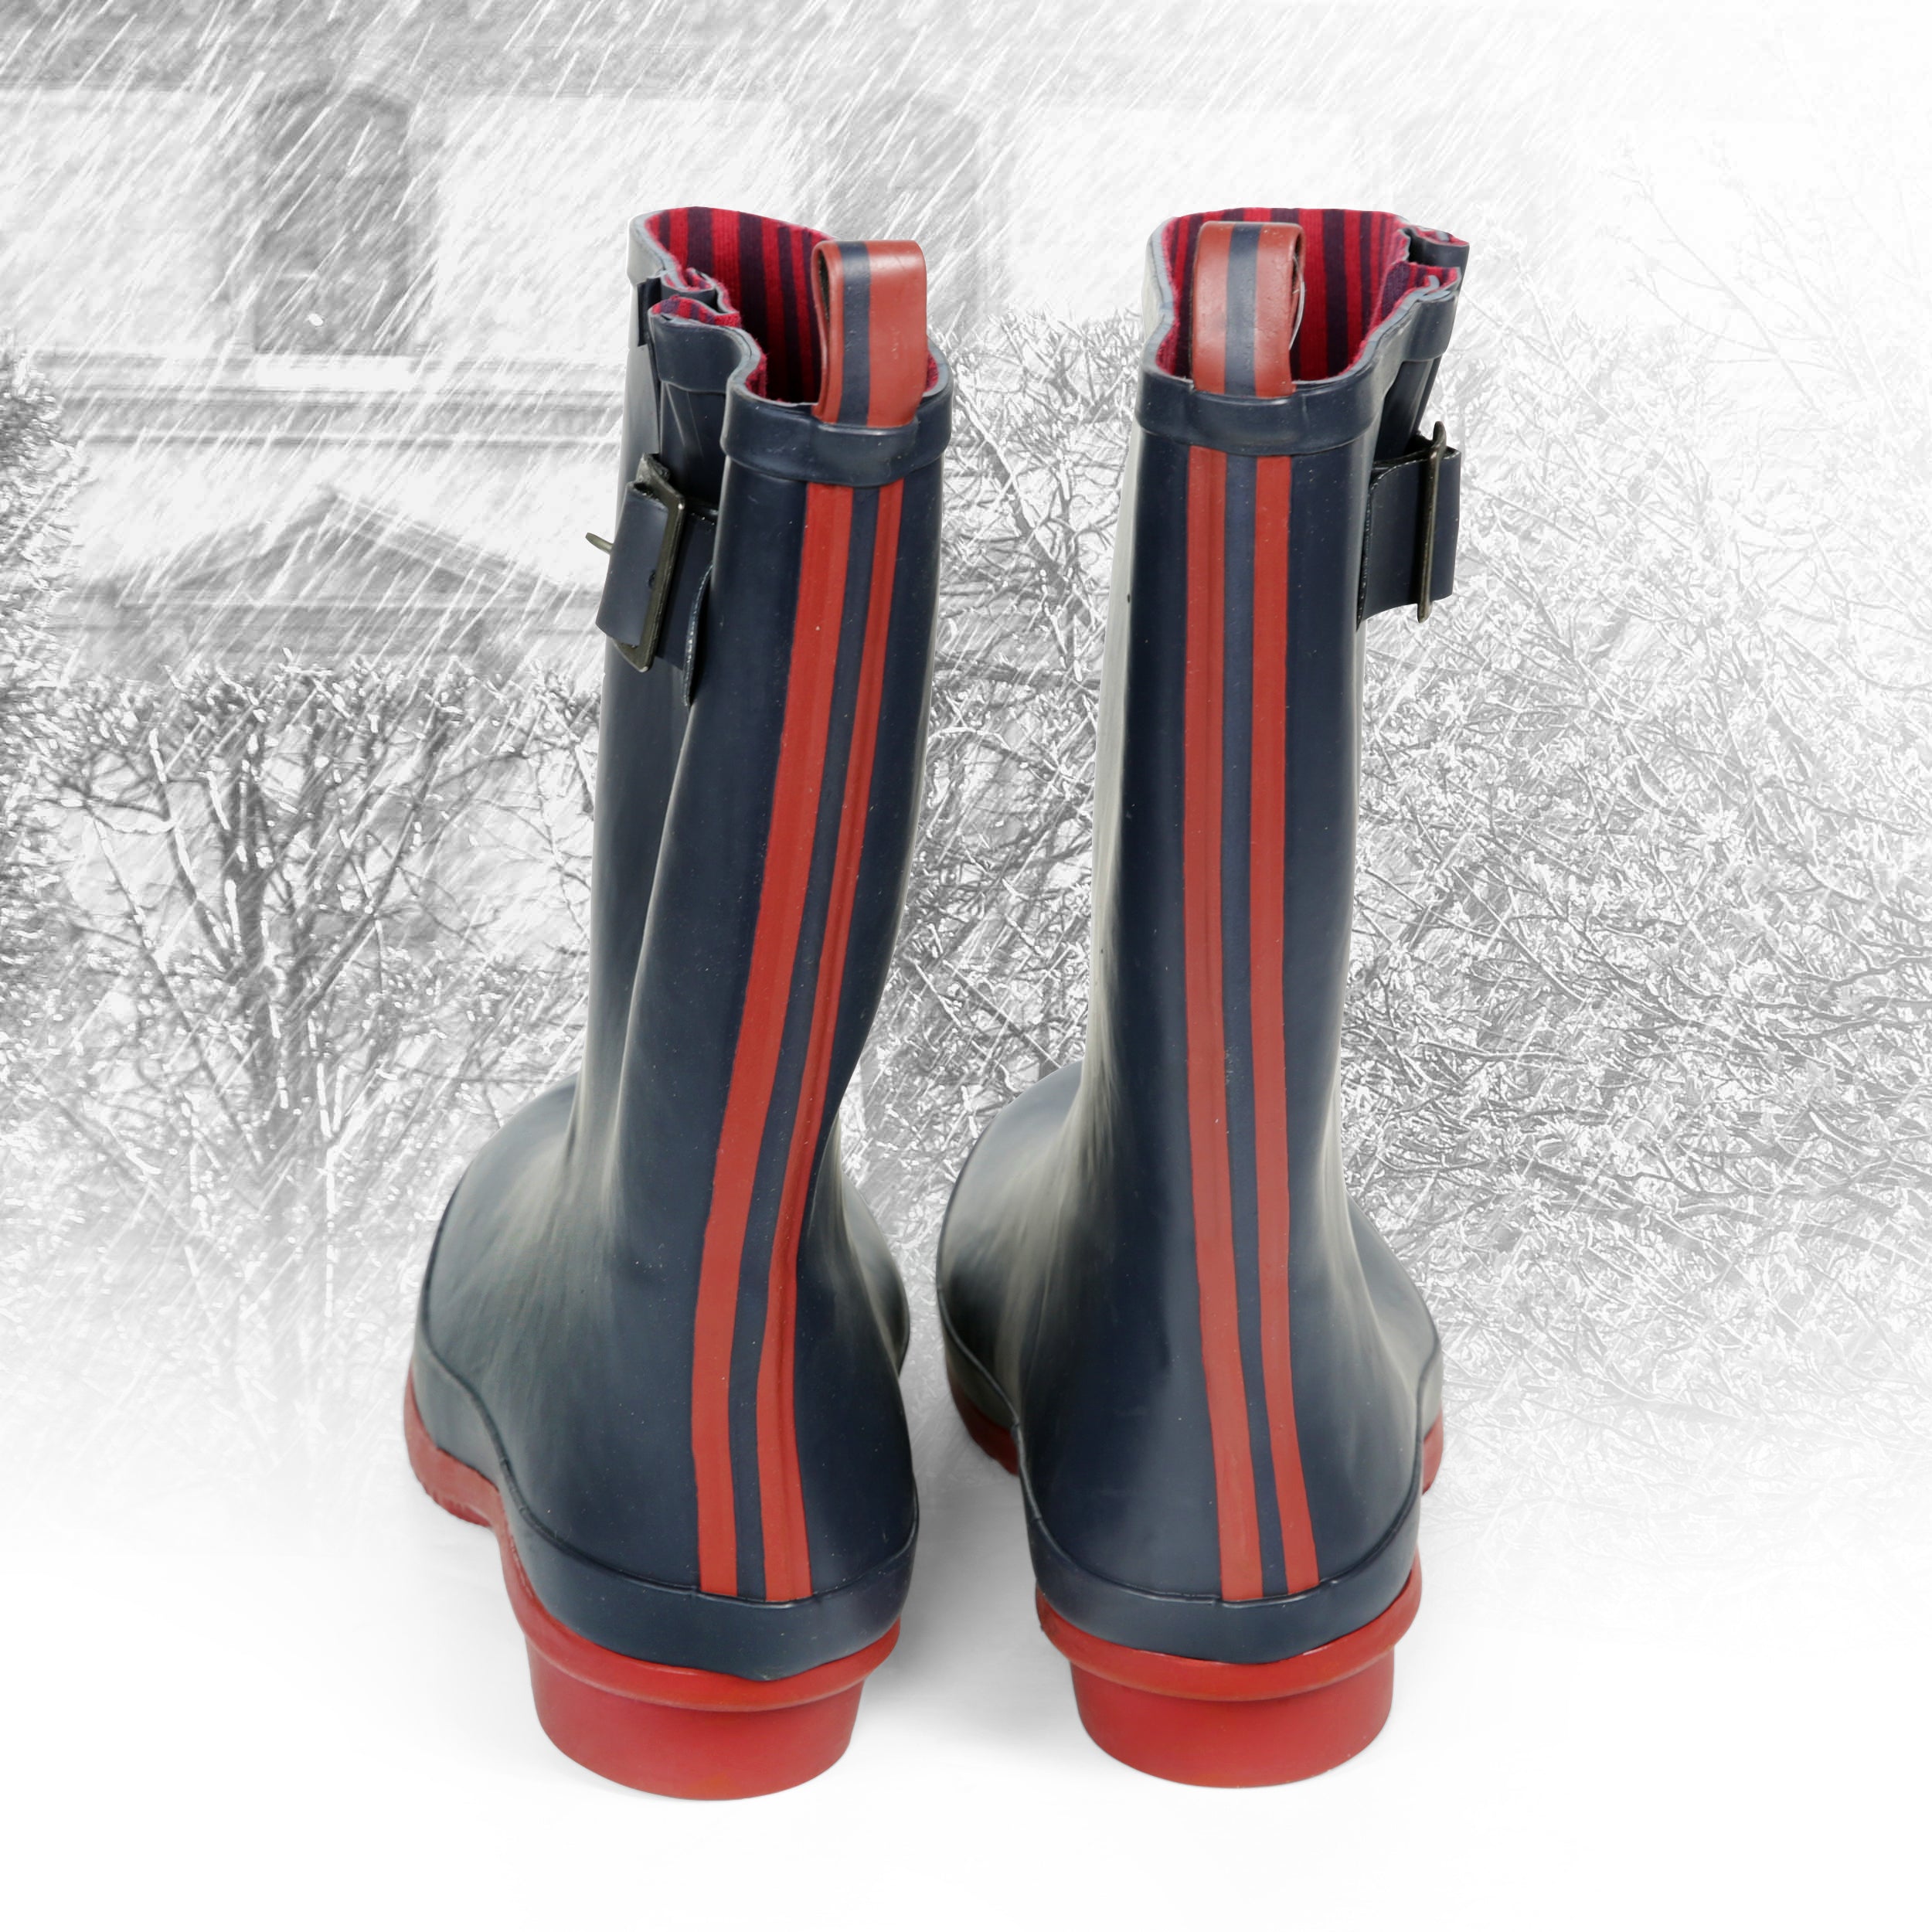 Briers Half Length Rubber Wellington Boots Navy/Red Stripe - Size 8